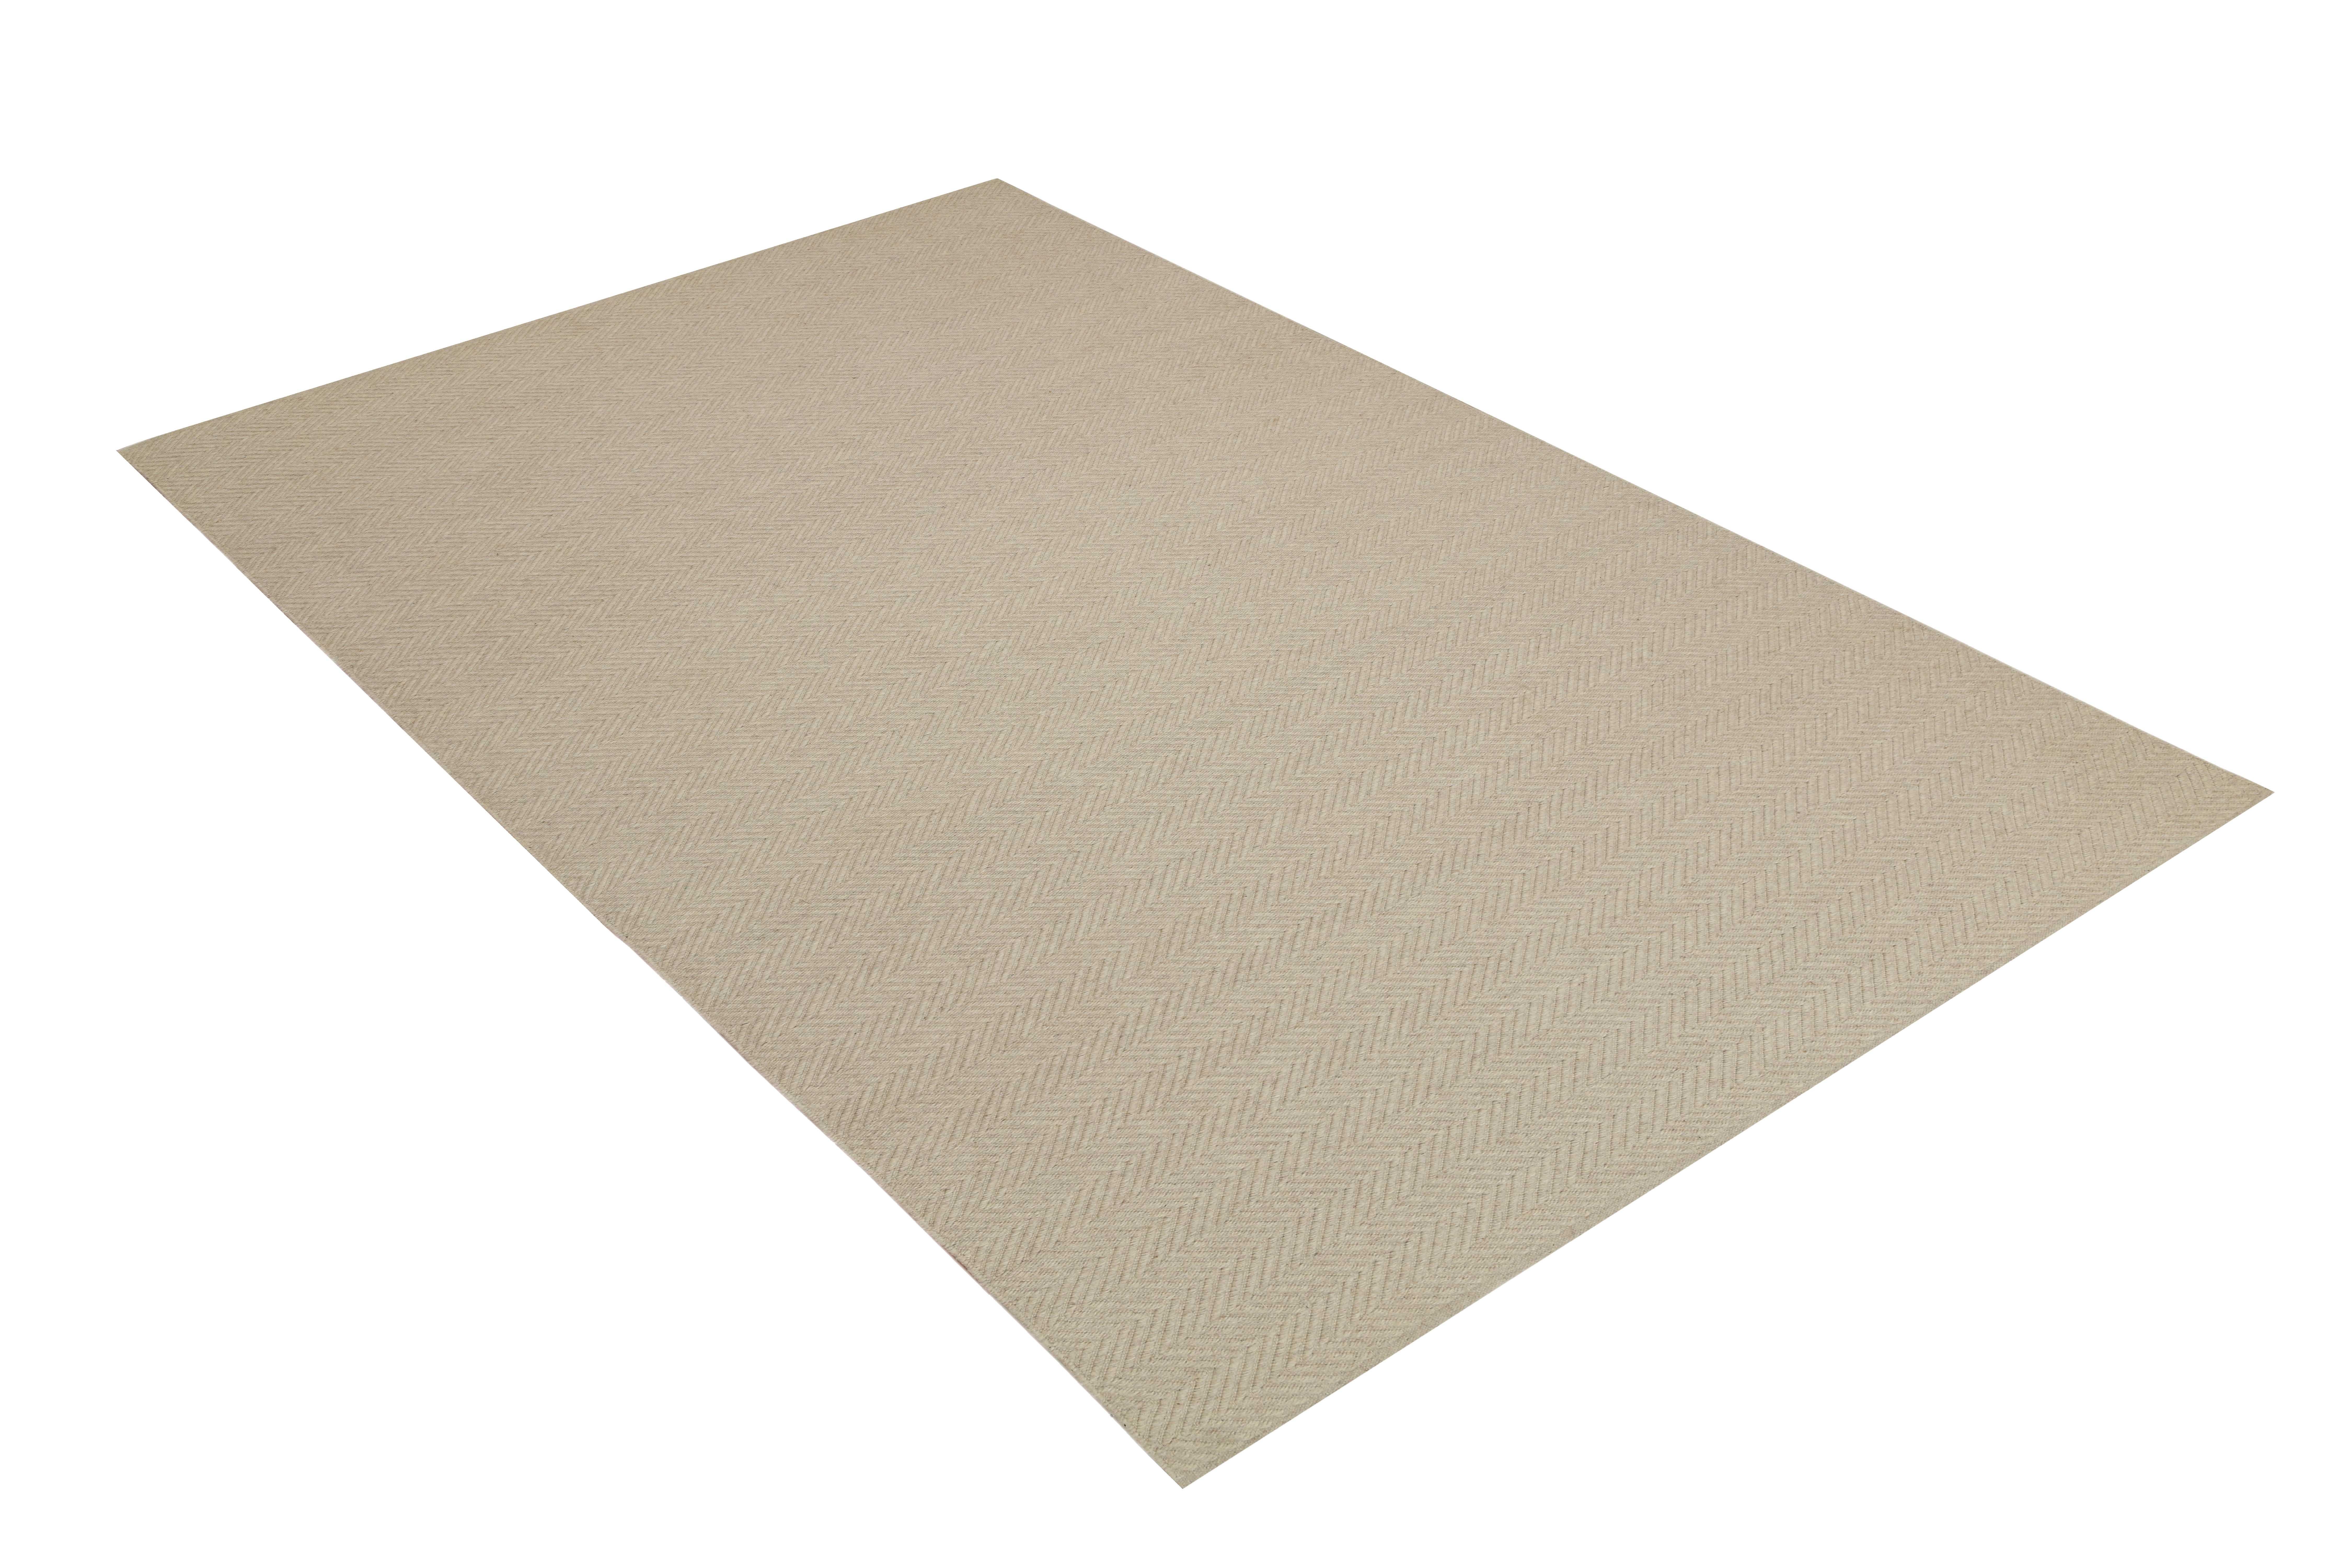 Indian Lanx, Beige, Handwoven Face 60% Undyed NZ Wool, 40% Undyed MED Wool, 8' x 10' For Sale